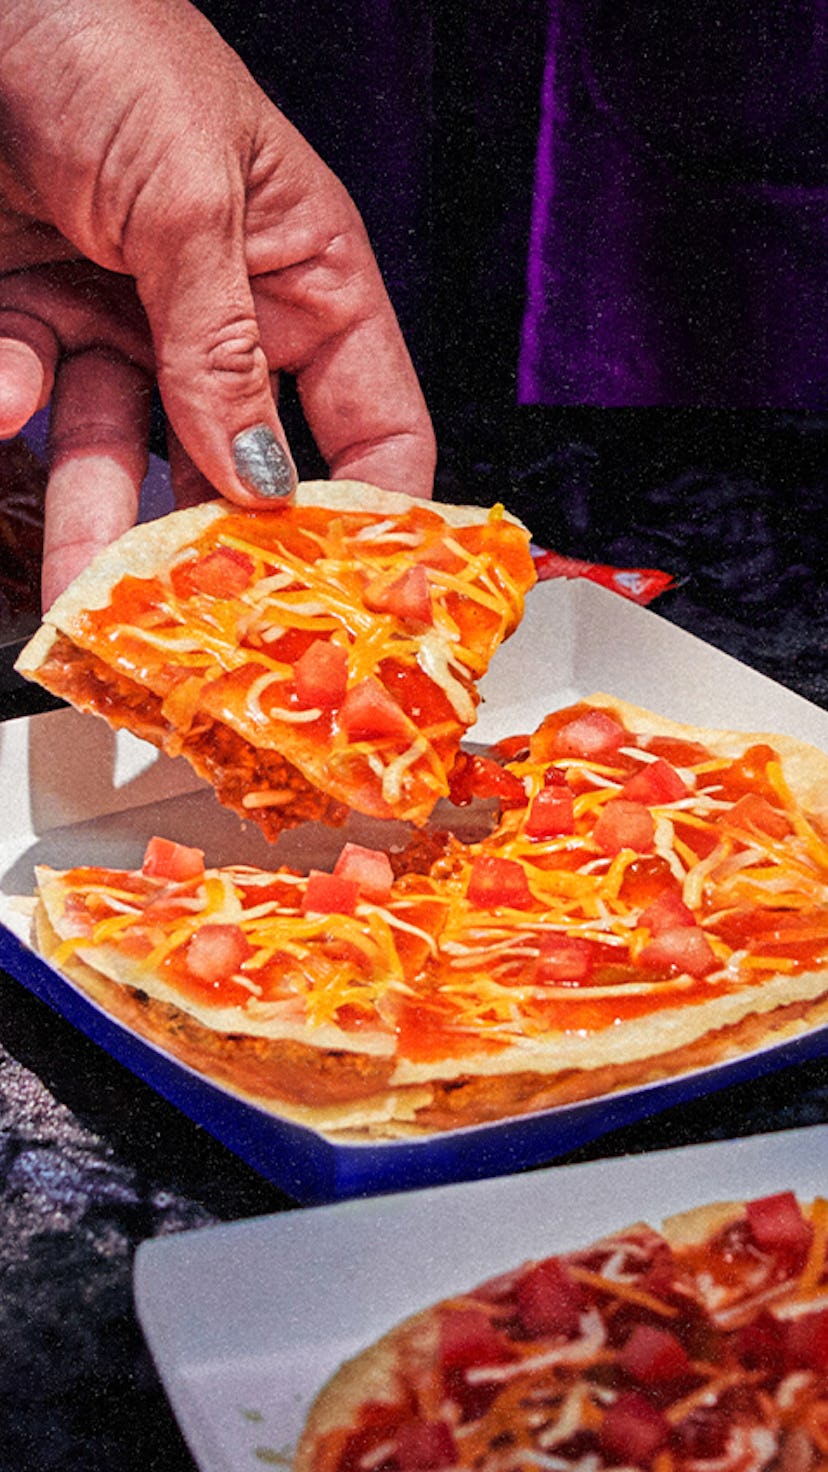 Taco Bell's fan-favorite Mexican Pizza is available for delivery after its May 19 return.